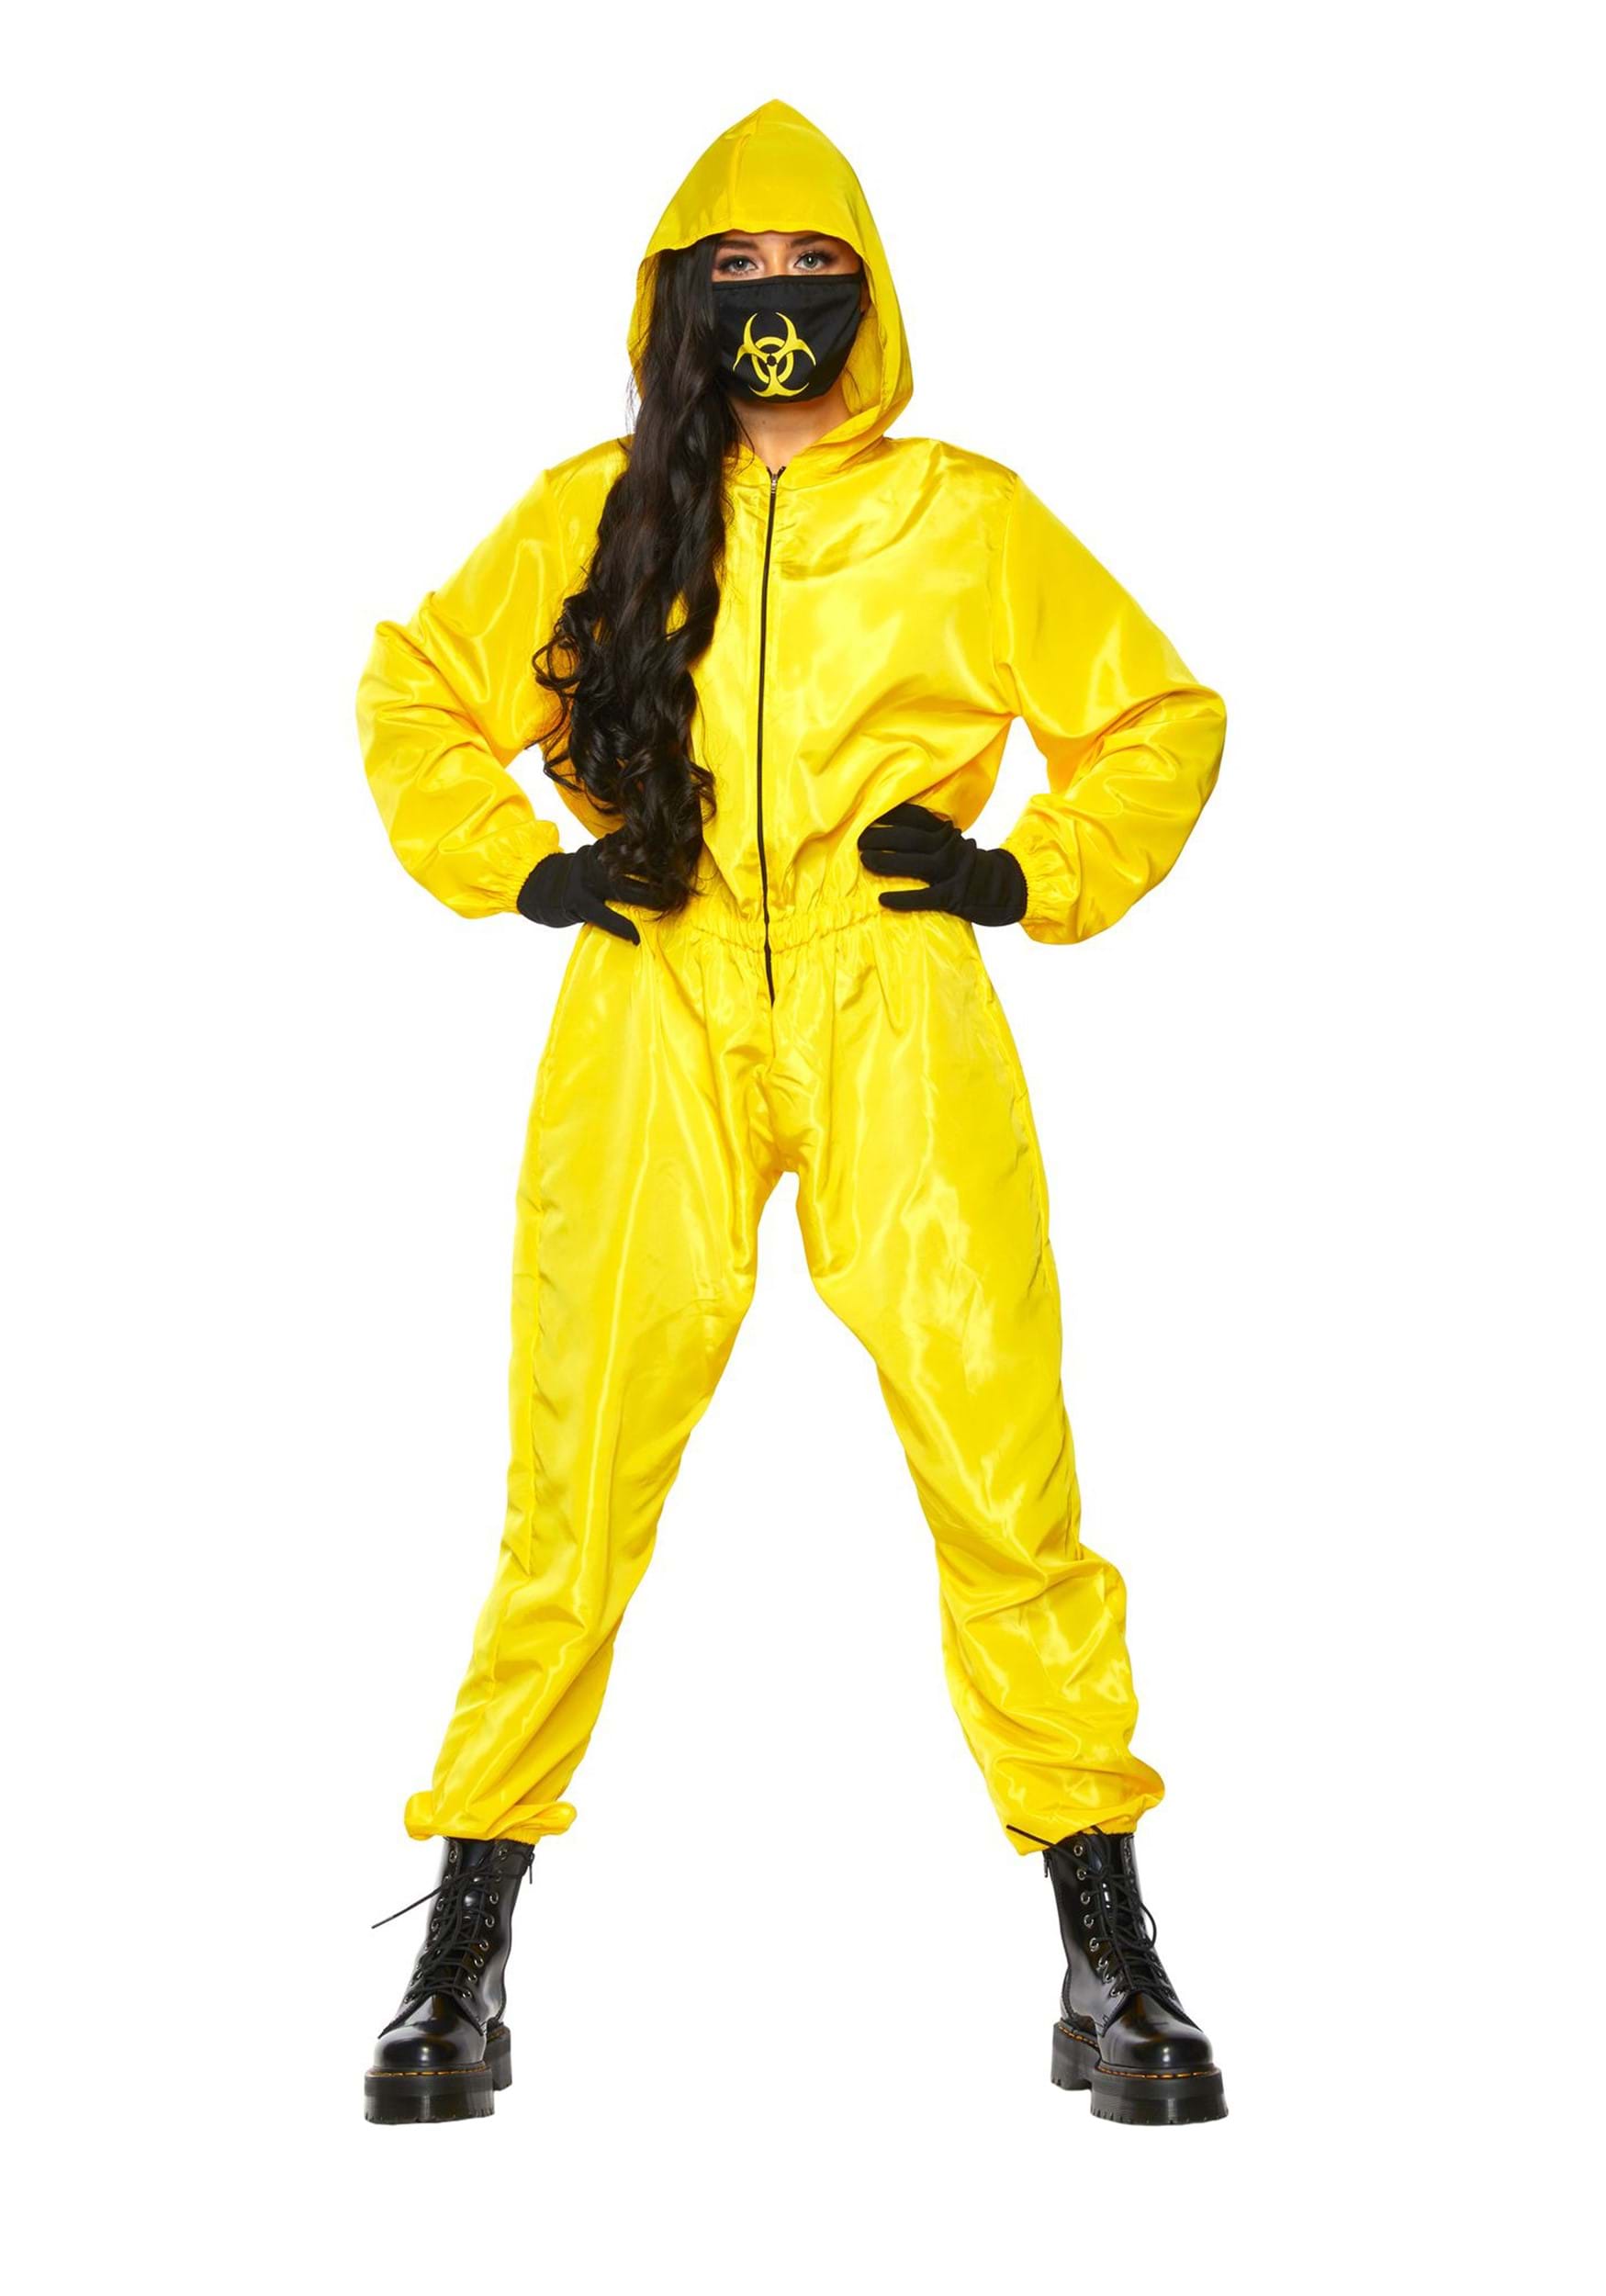 Radiation Suit: Do You Need a Hazmat Suit for Radiation? - PK Safety Supply